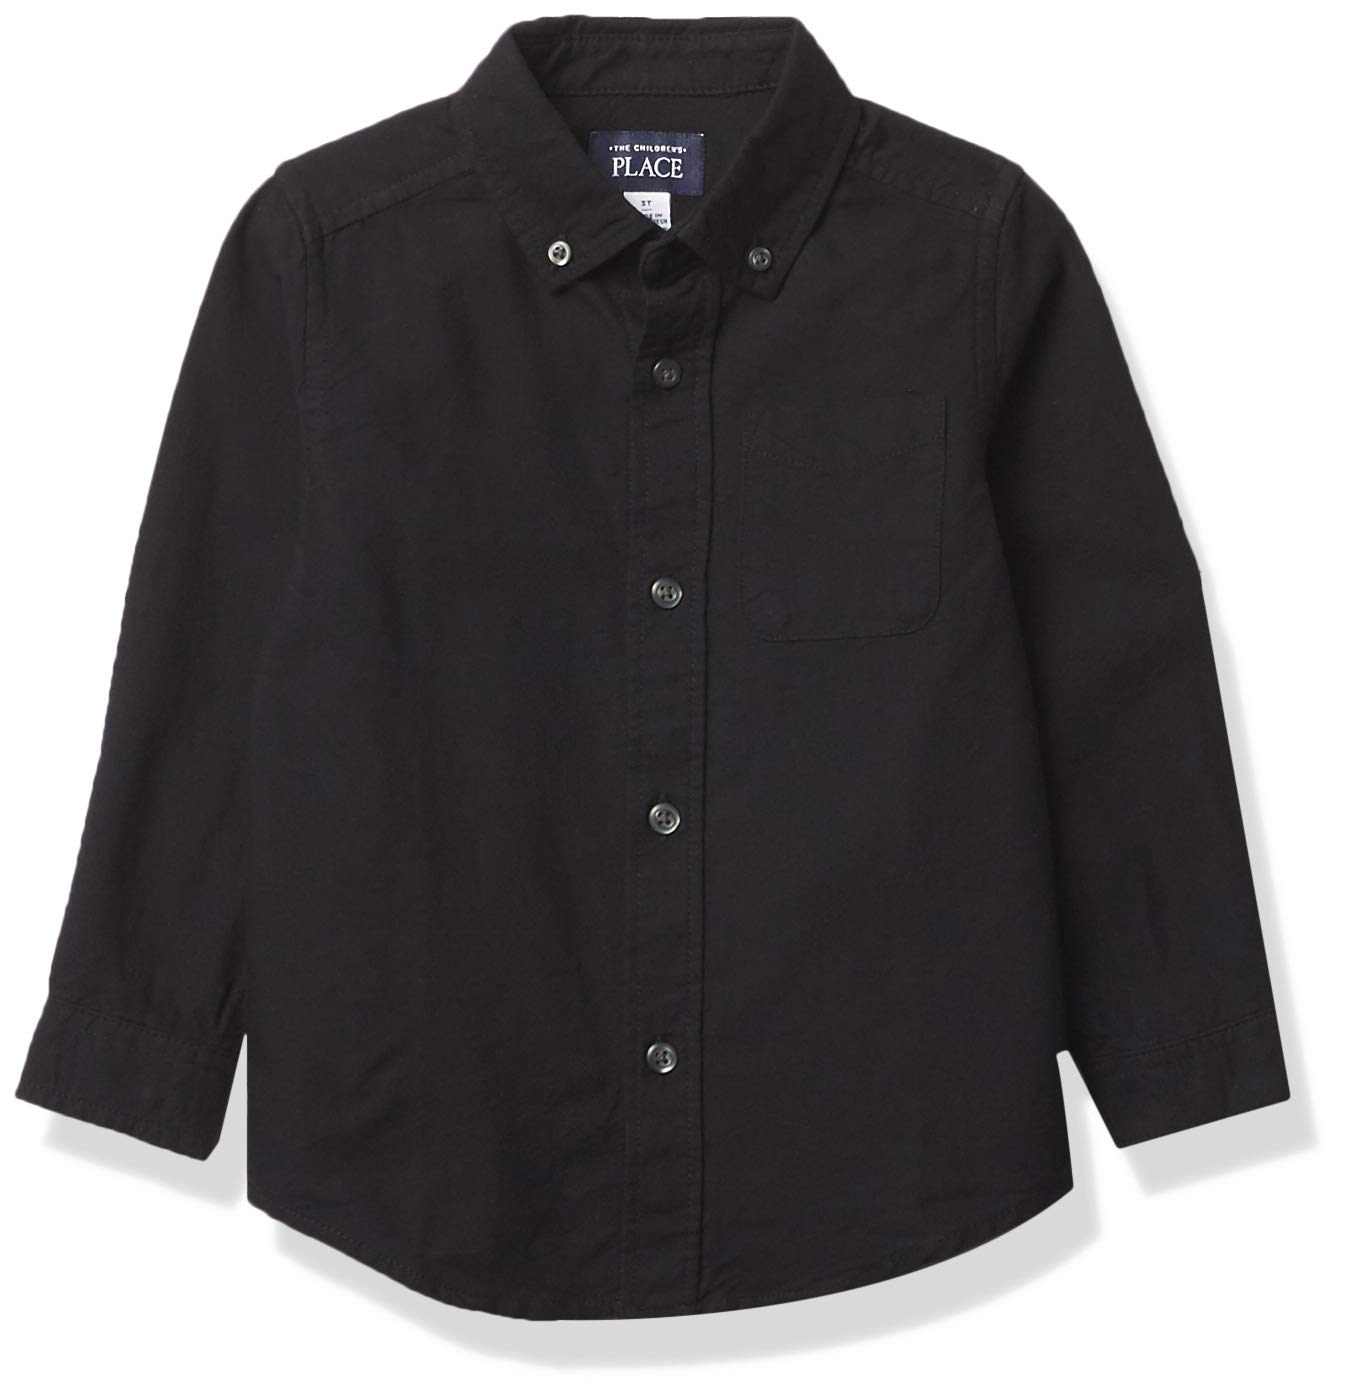 The Children's Place Baby Boys' Single and Toddler Long Sleeve Oxford Button Down Shirt